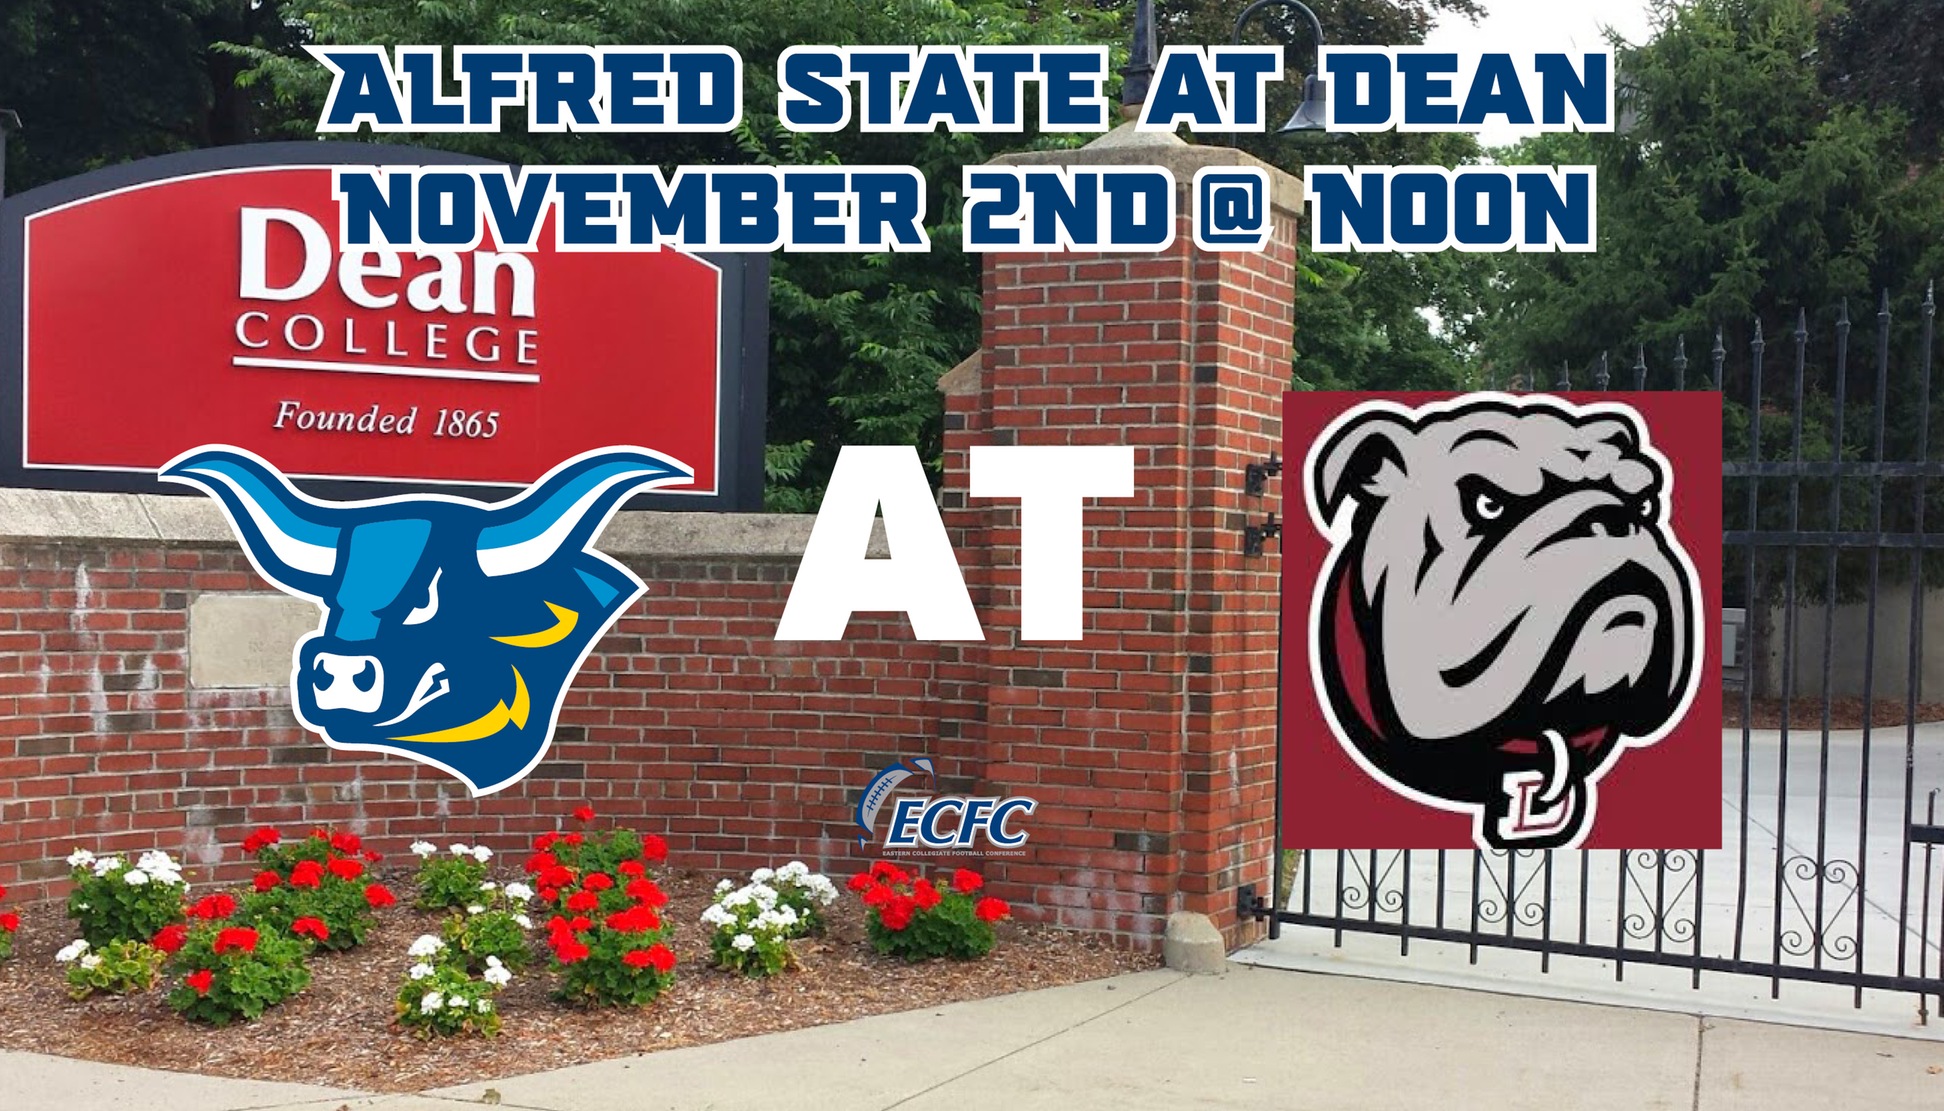 Alfred State travels to Franklin, MA to take on Dean in their final road game of the 2019 season.